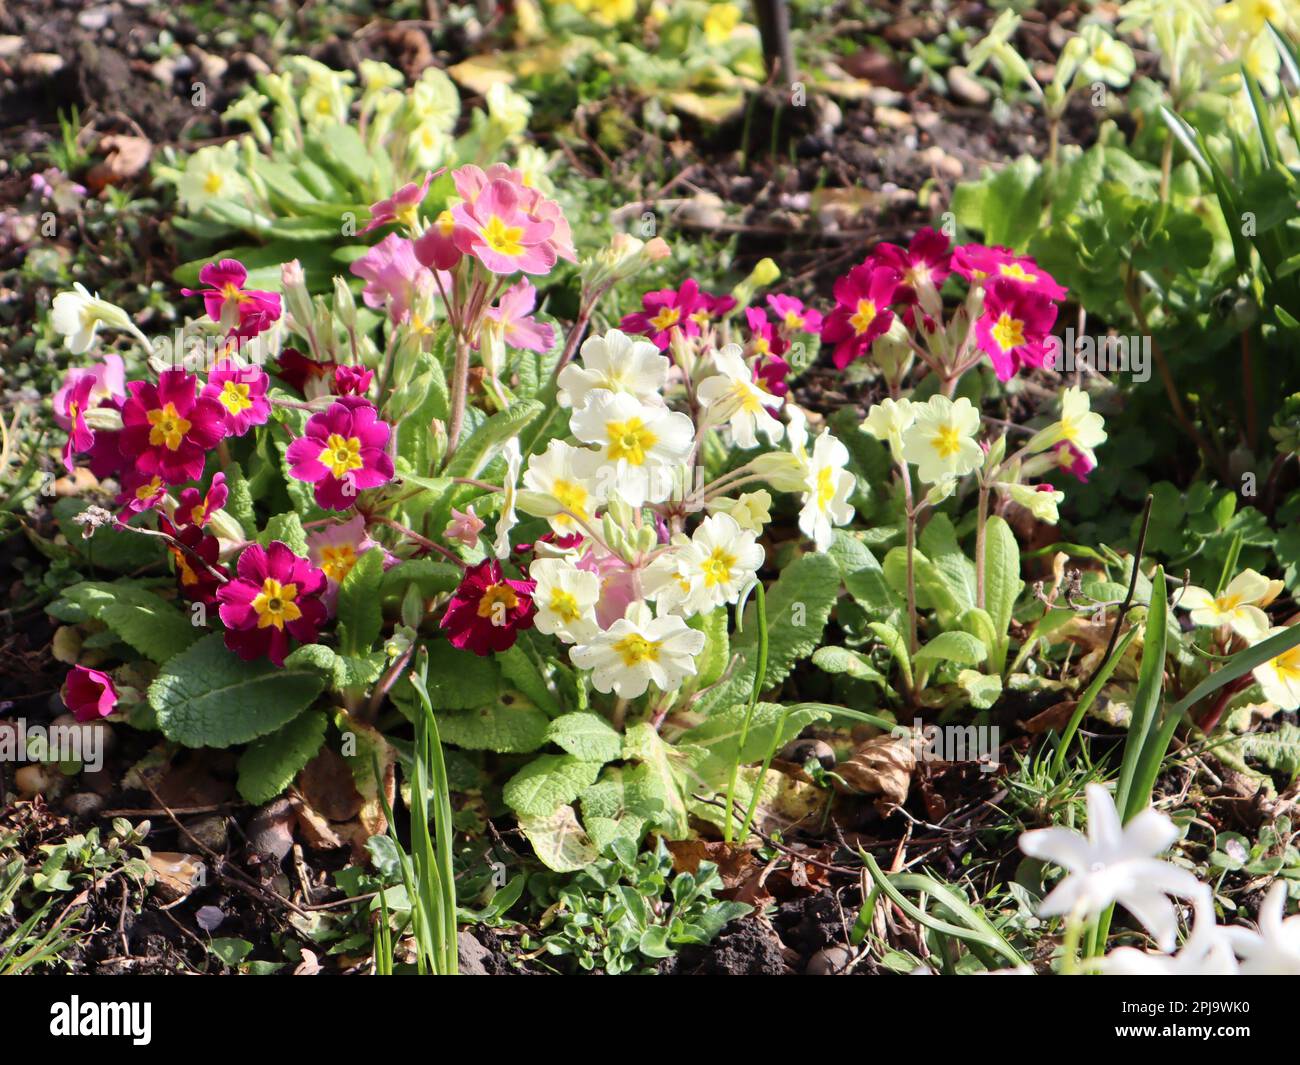 Primula polyanthus flowers growing in a garden Stock Photo